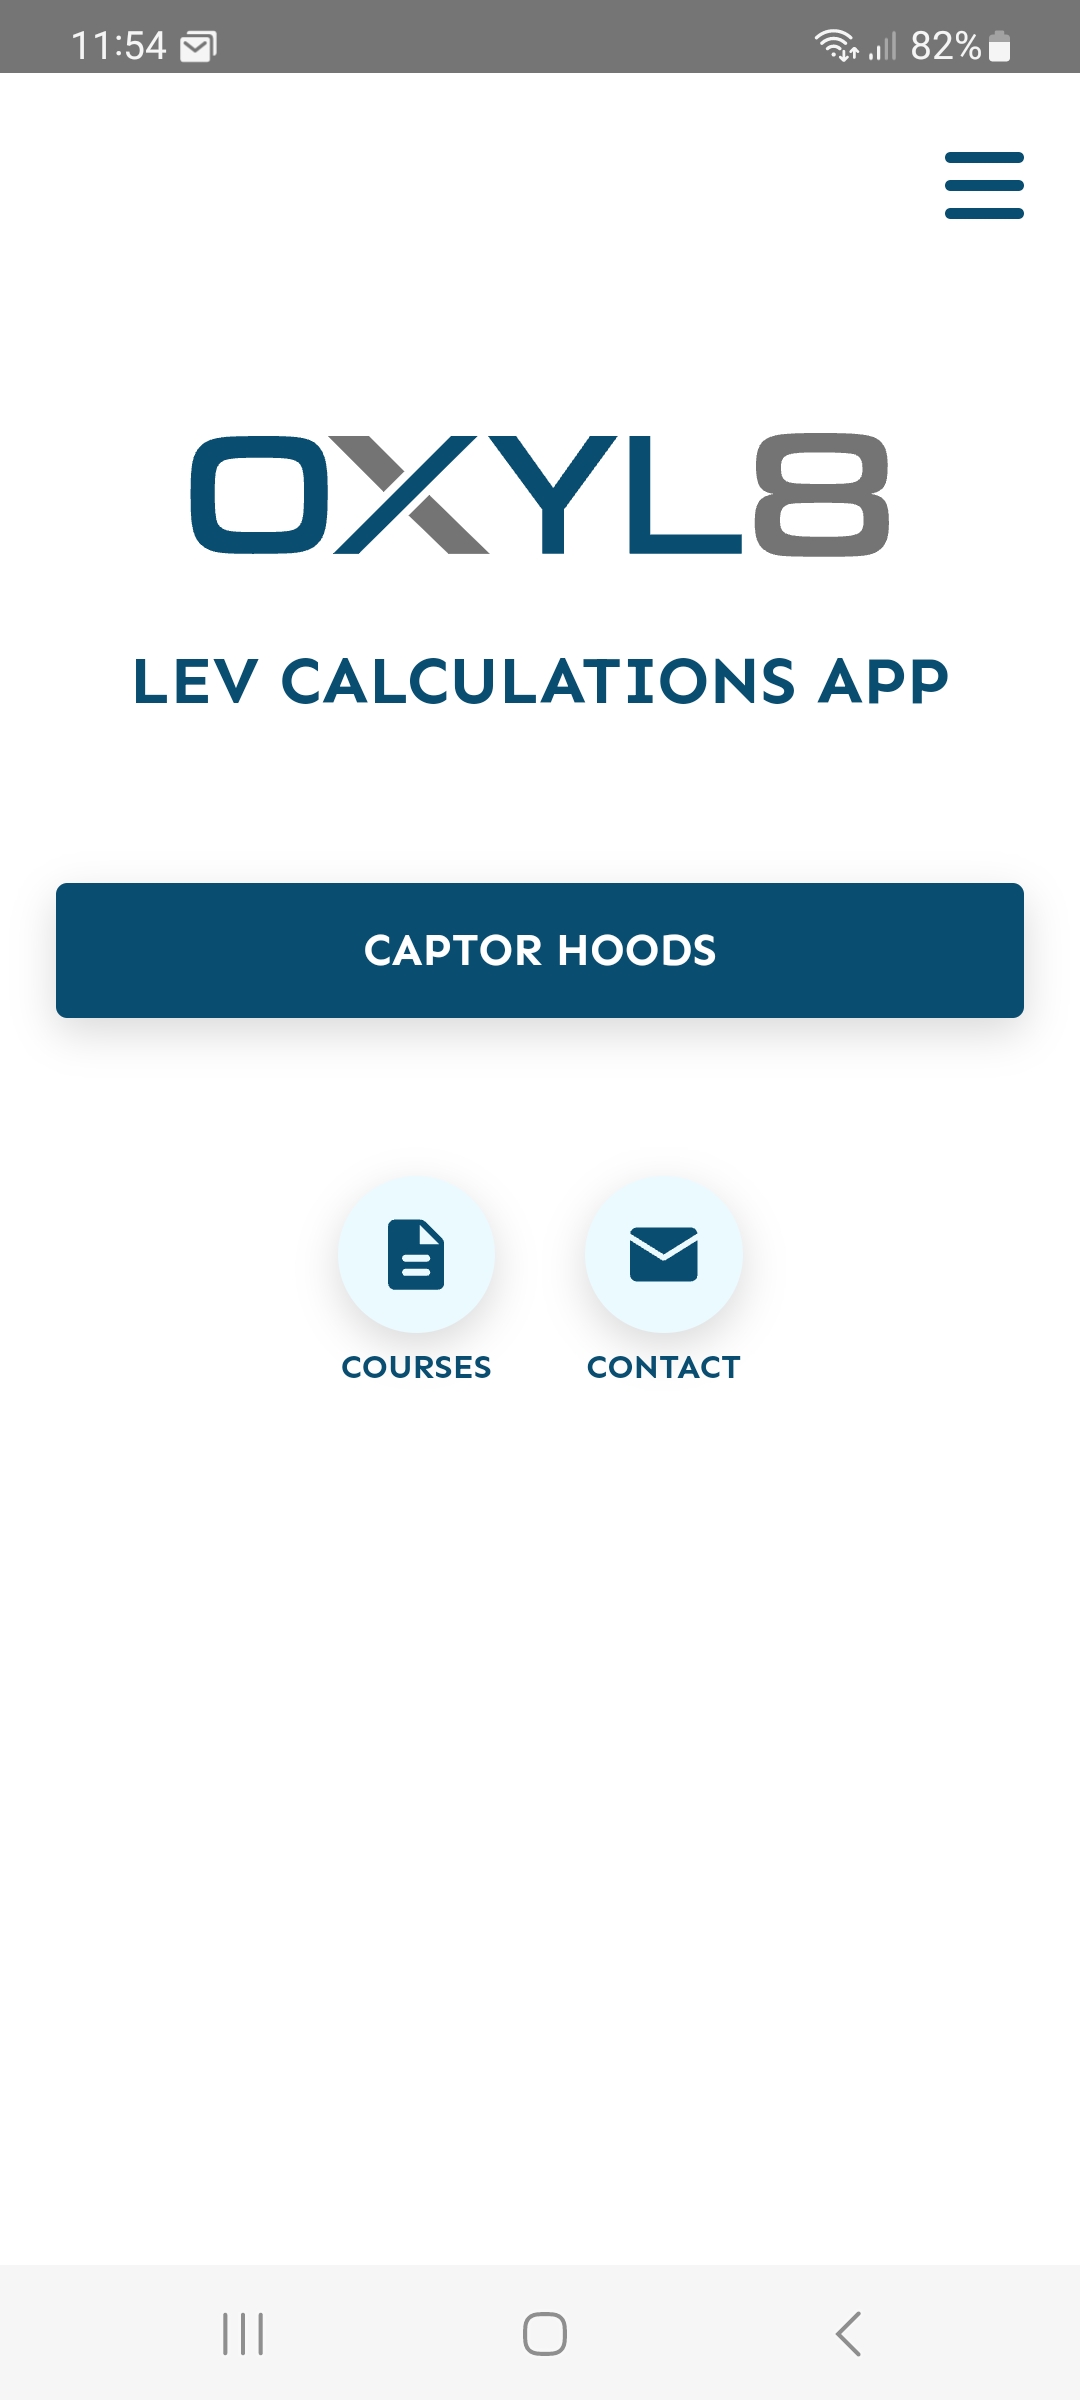 OXYL8 Captor Hood Calculation Apps for iPhone and Android